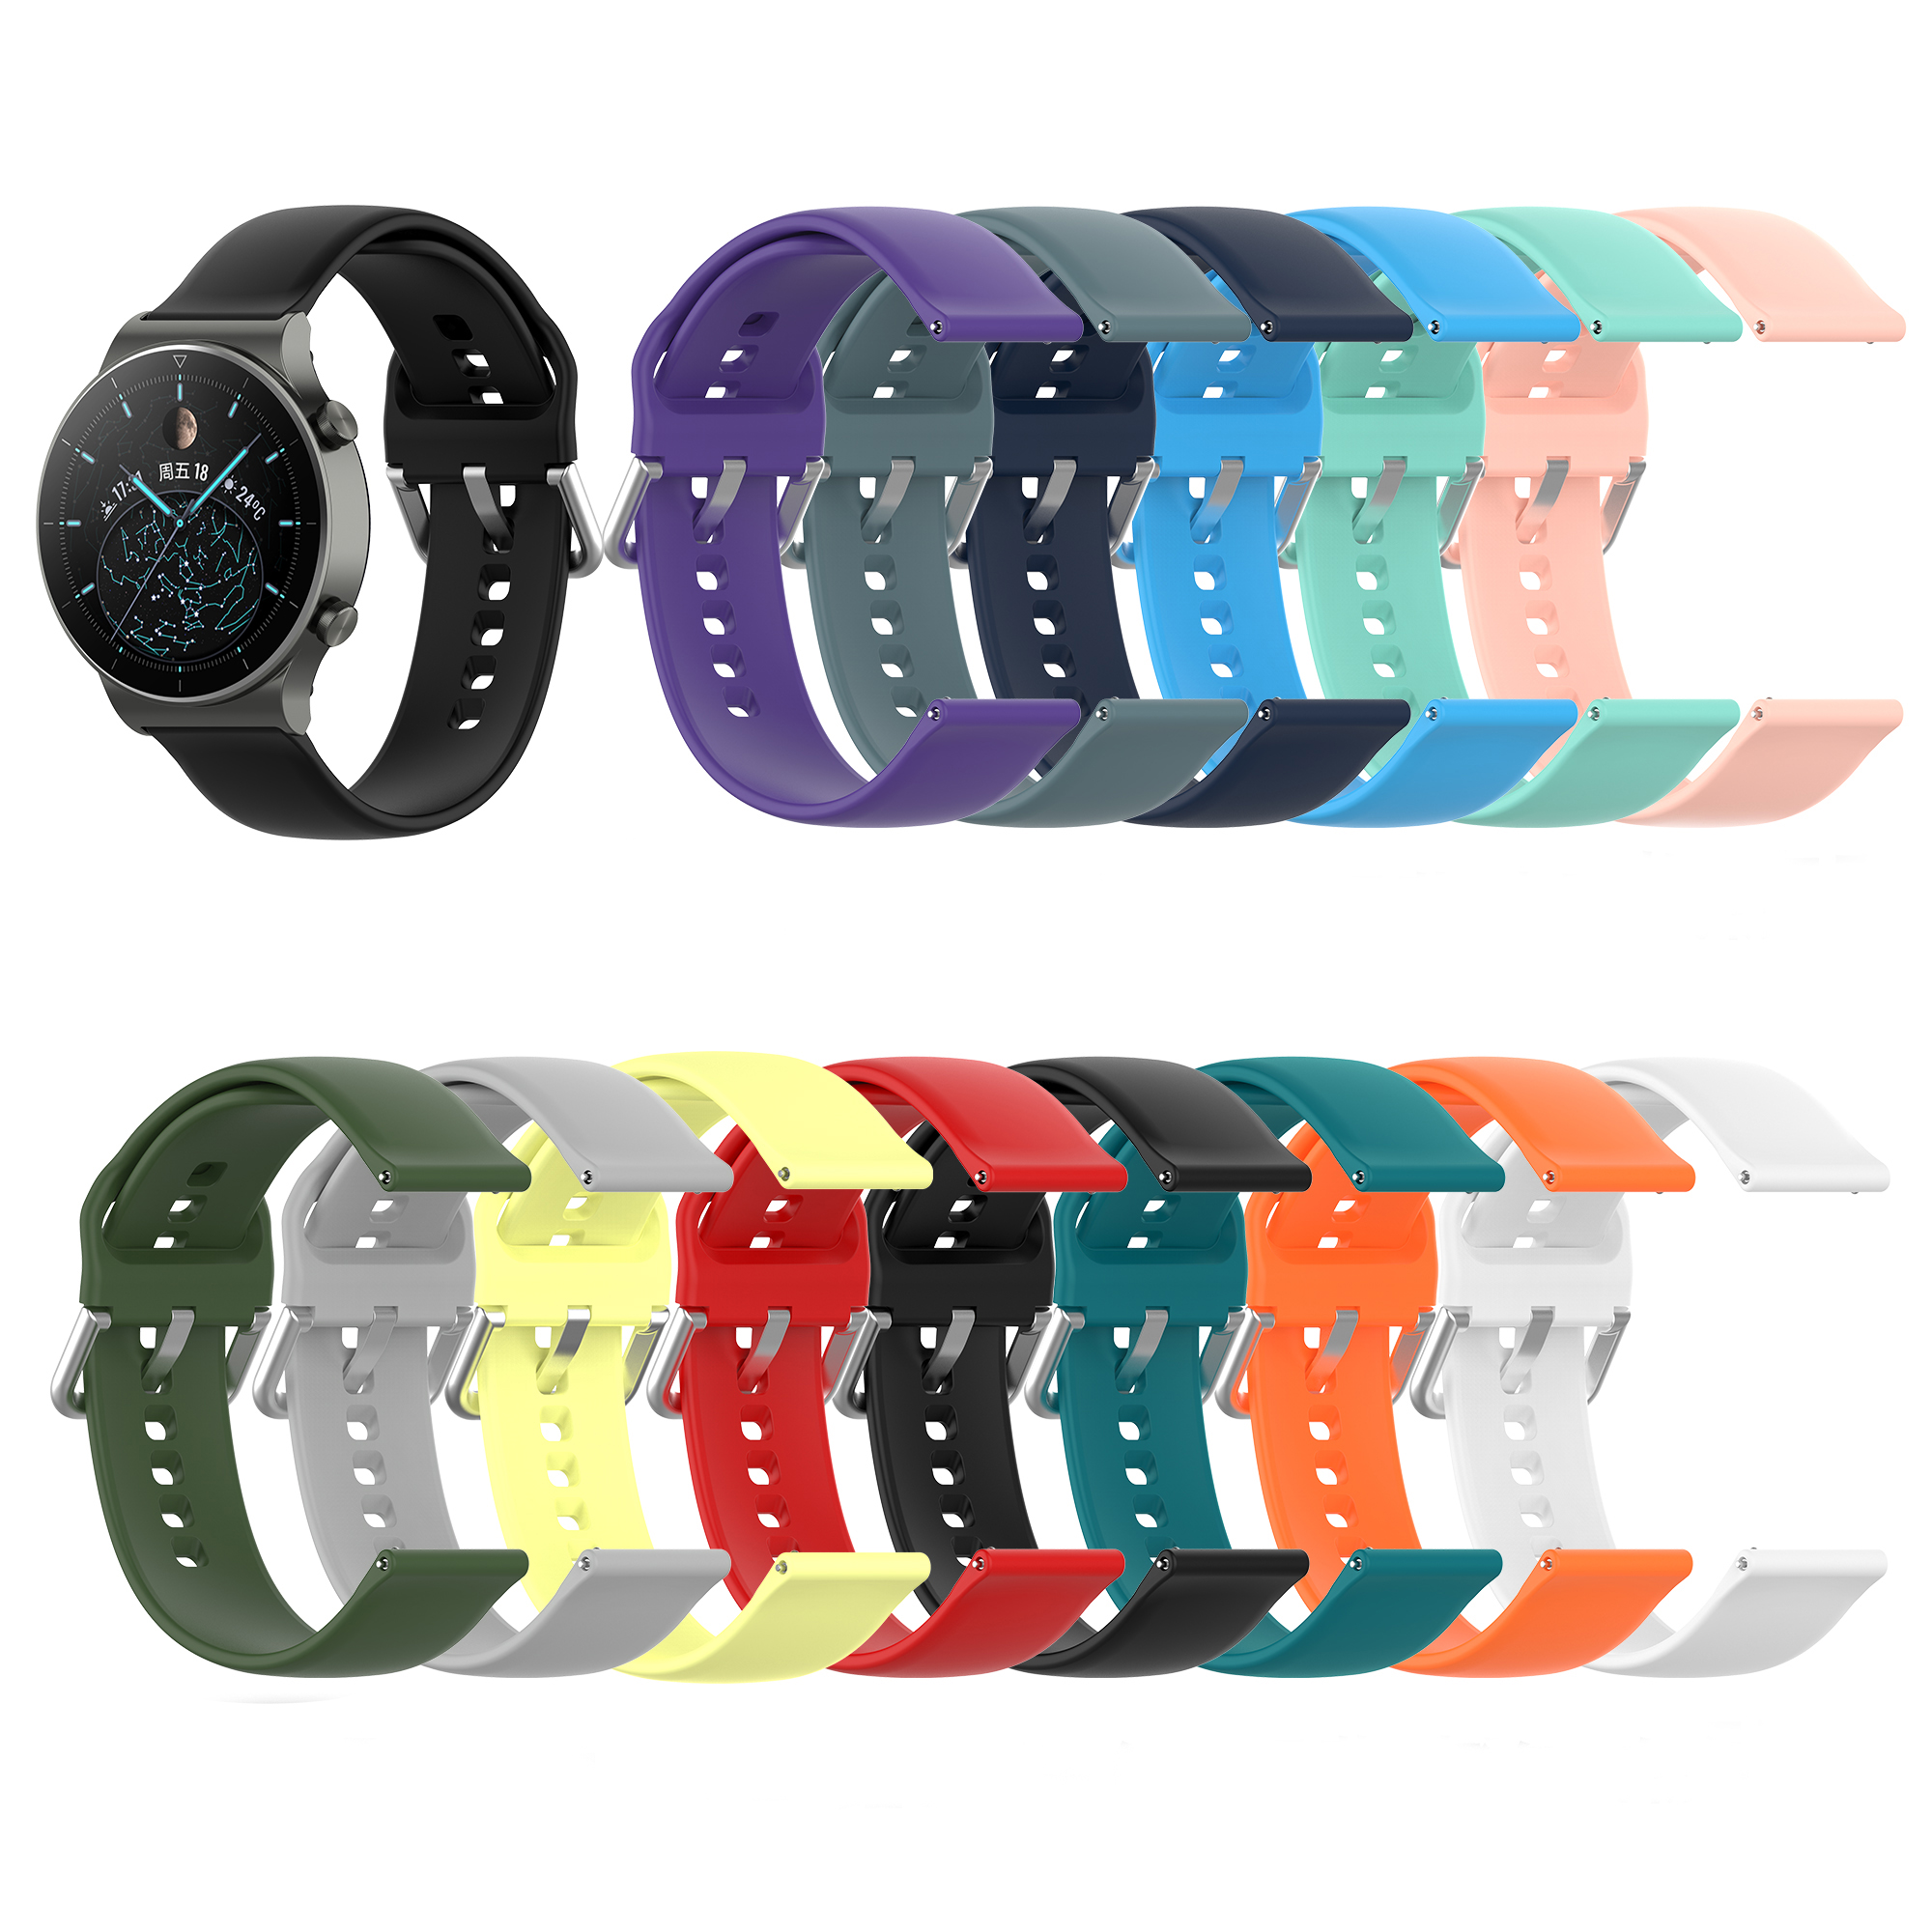 Bakeey 22mm Multi-color Silicone Siver Buckle Replacement Strap Smart Watch Band For Huawei Watch GT2 PRO